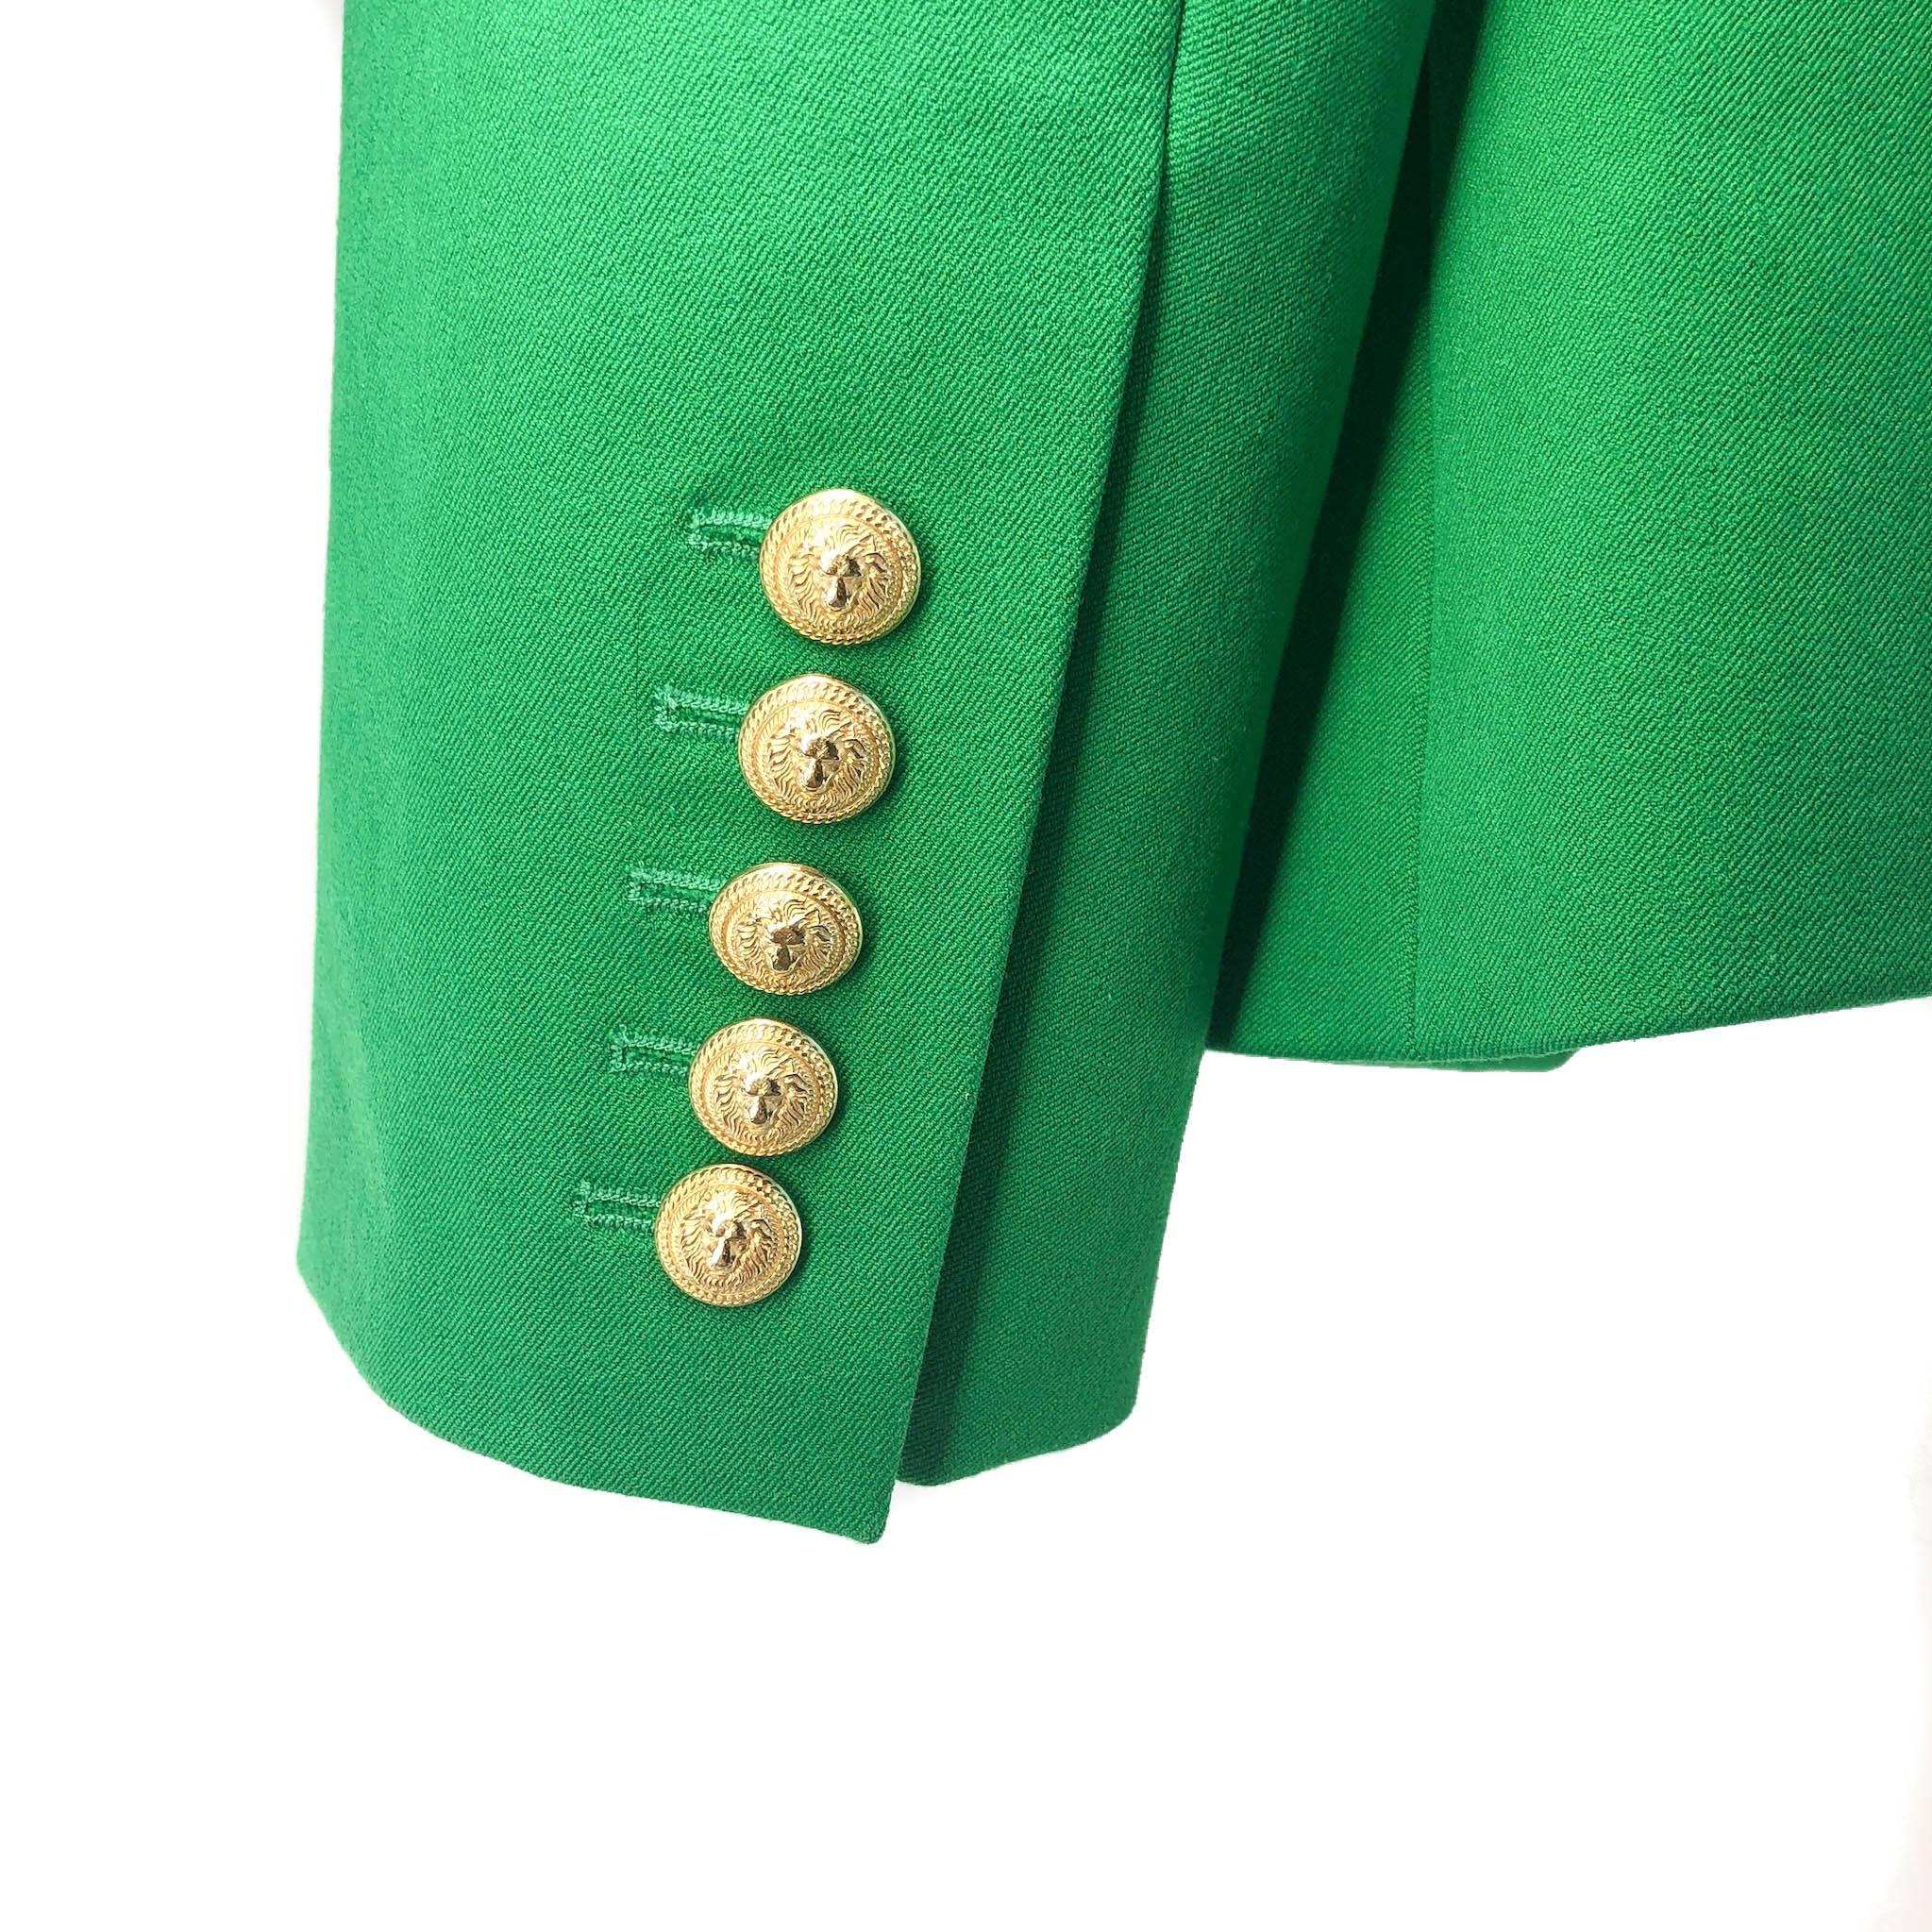 Balmain Emerald Green Blazer with Gold Buttons In Excellent Condition For Sale In Toronto, Ontario